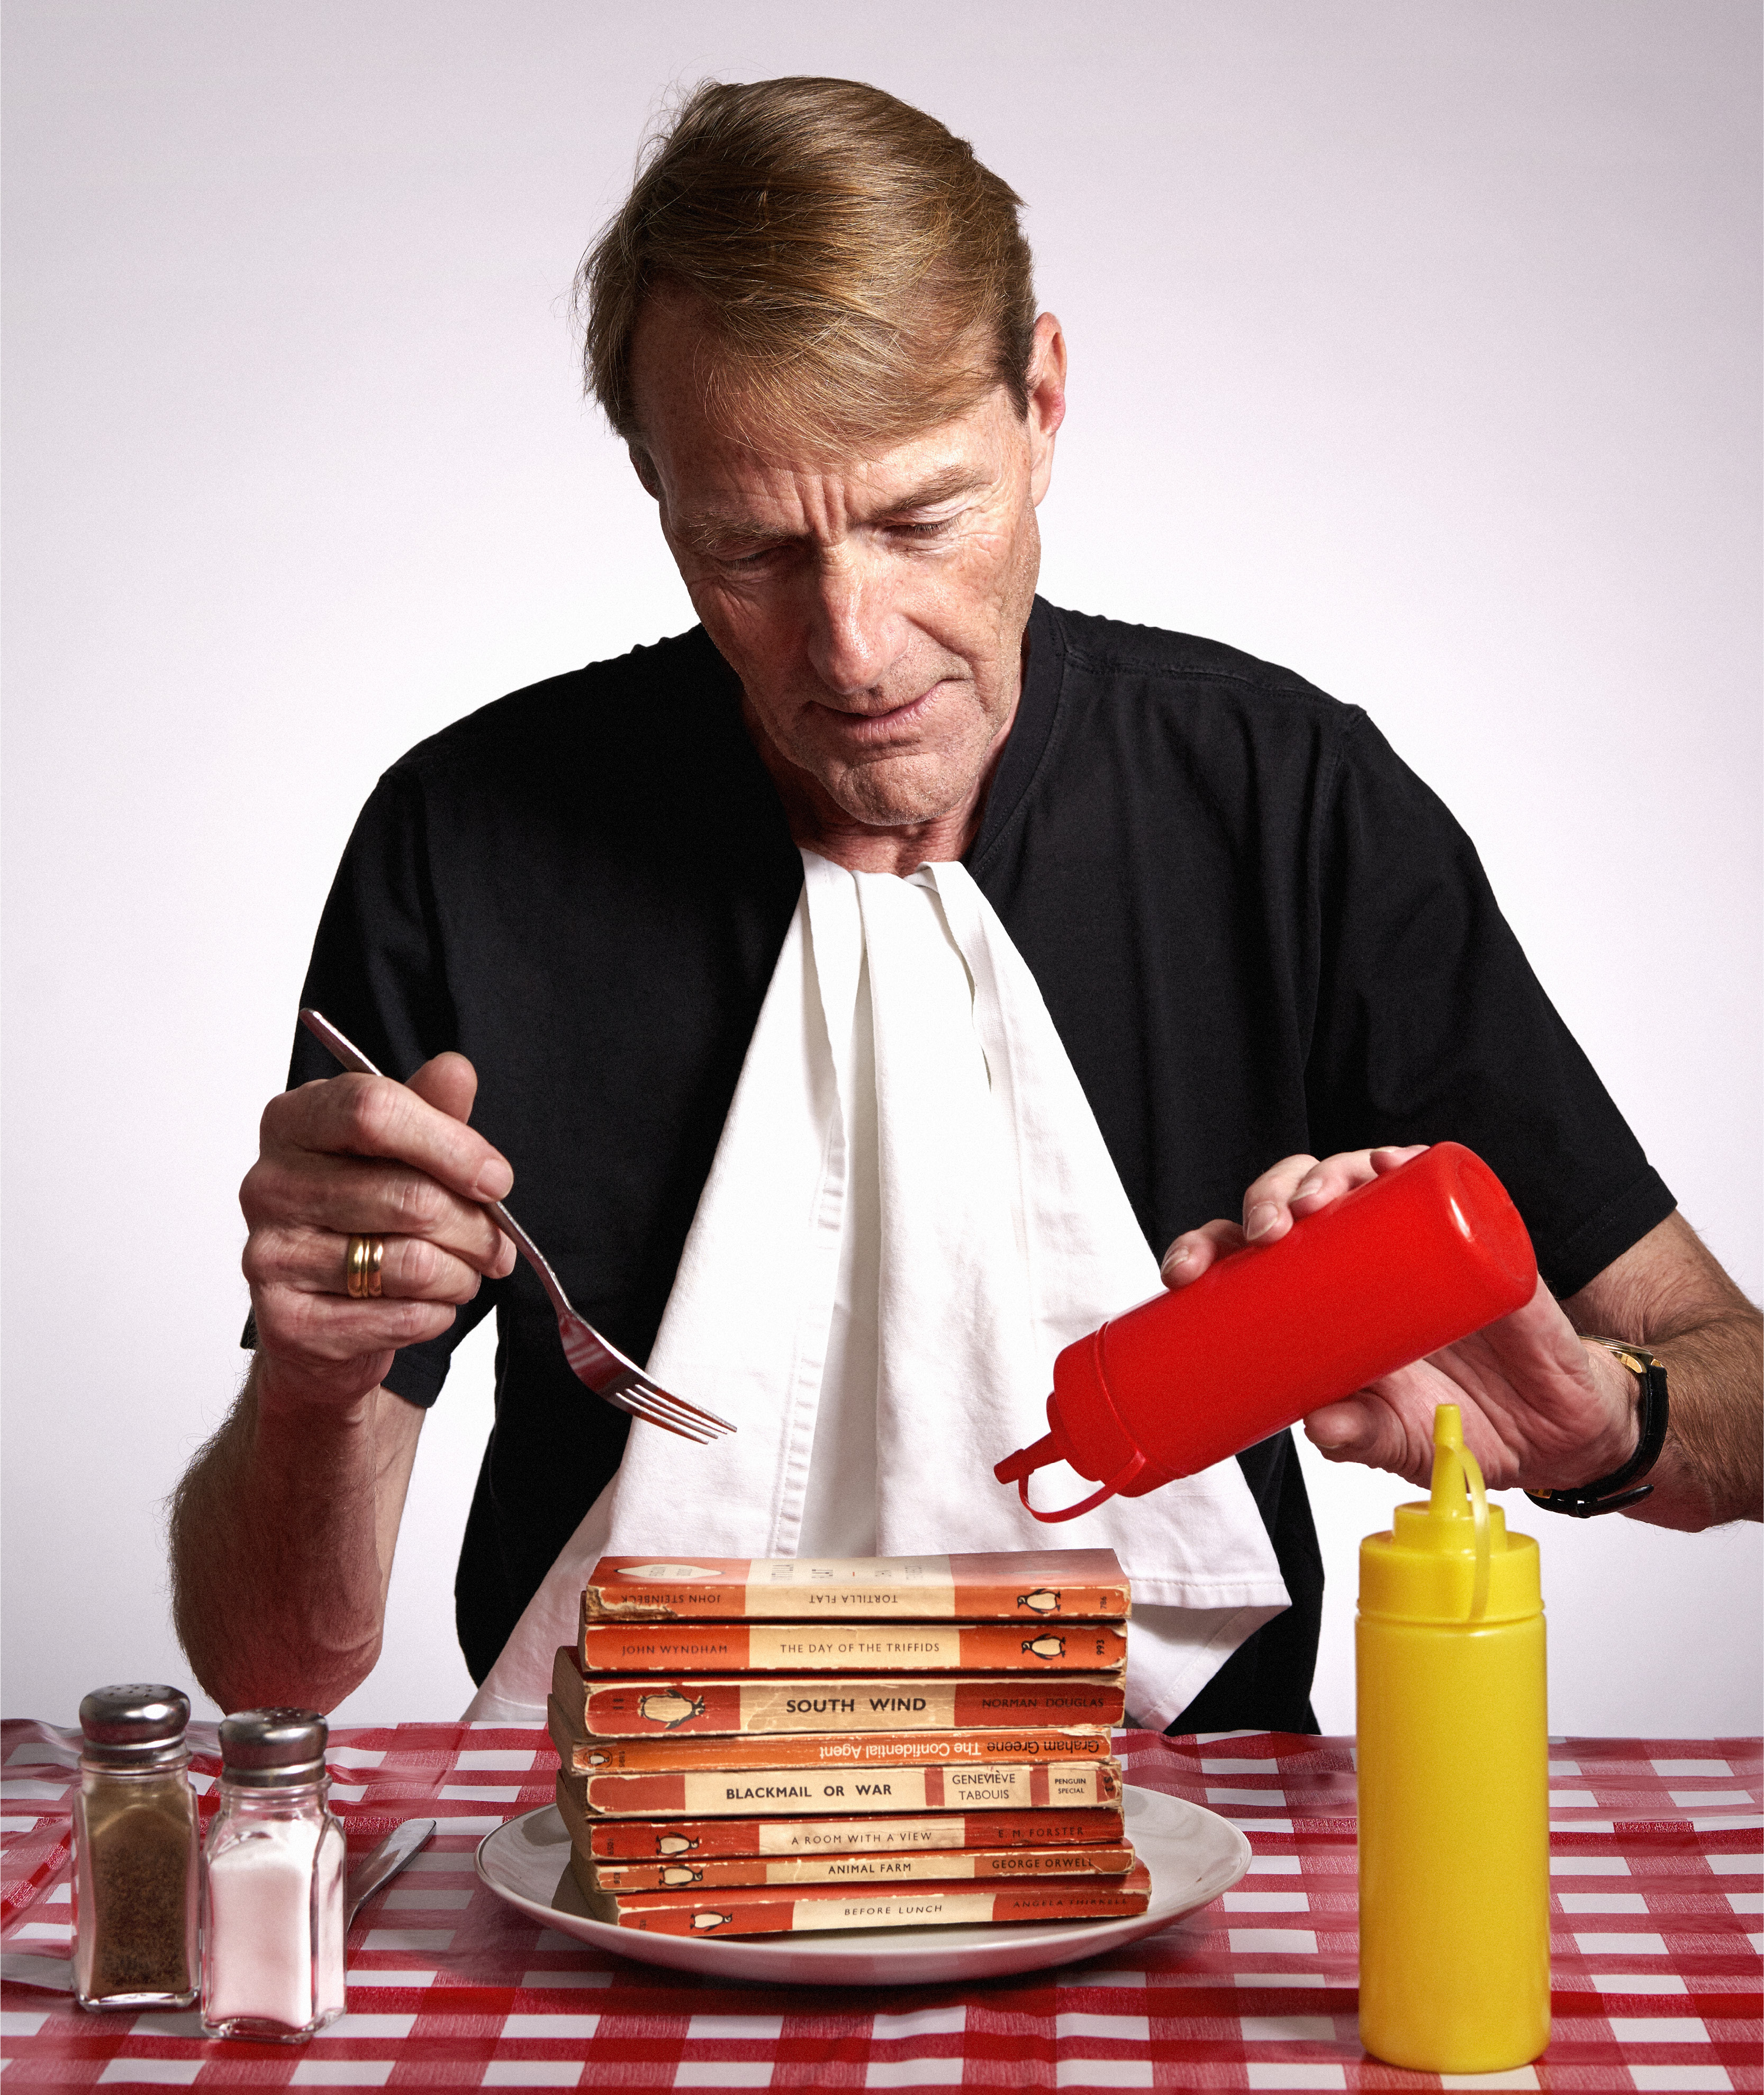 Lee Child with a balanced meal. Photo: Stuart Simpson for Penguin 2019